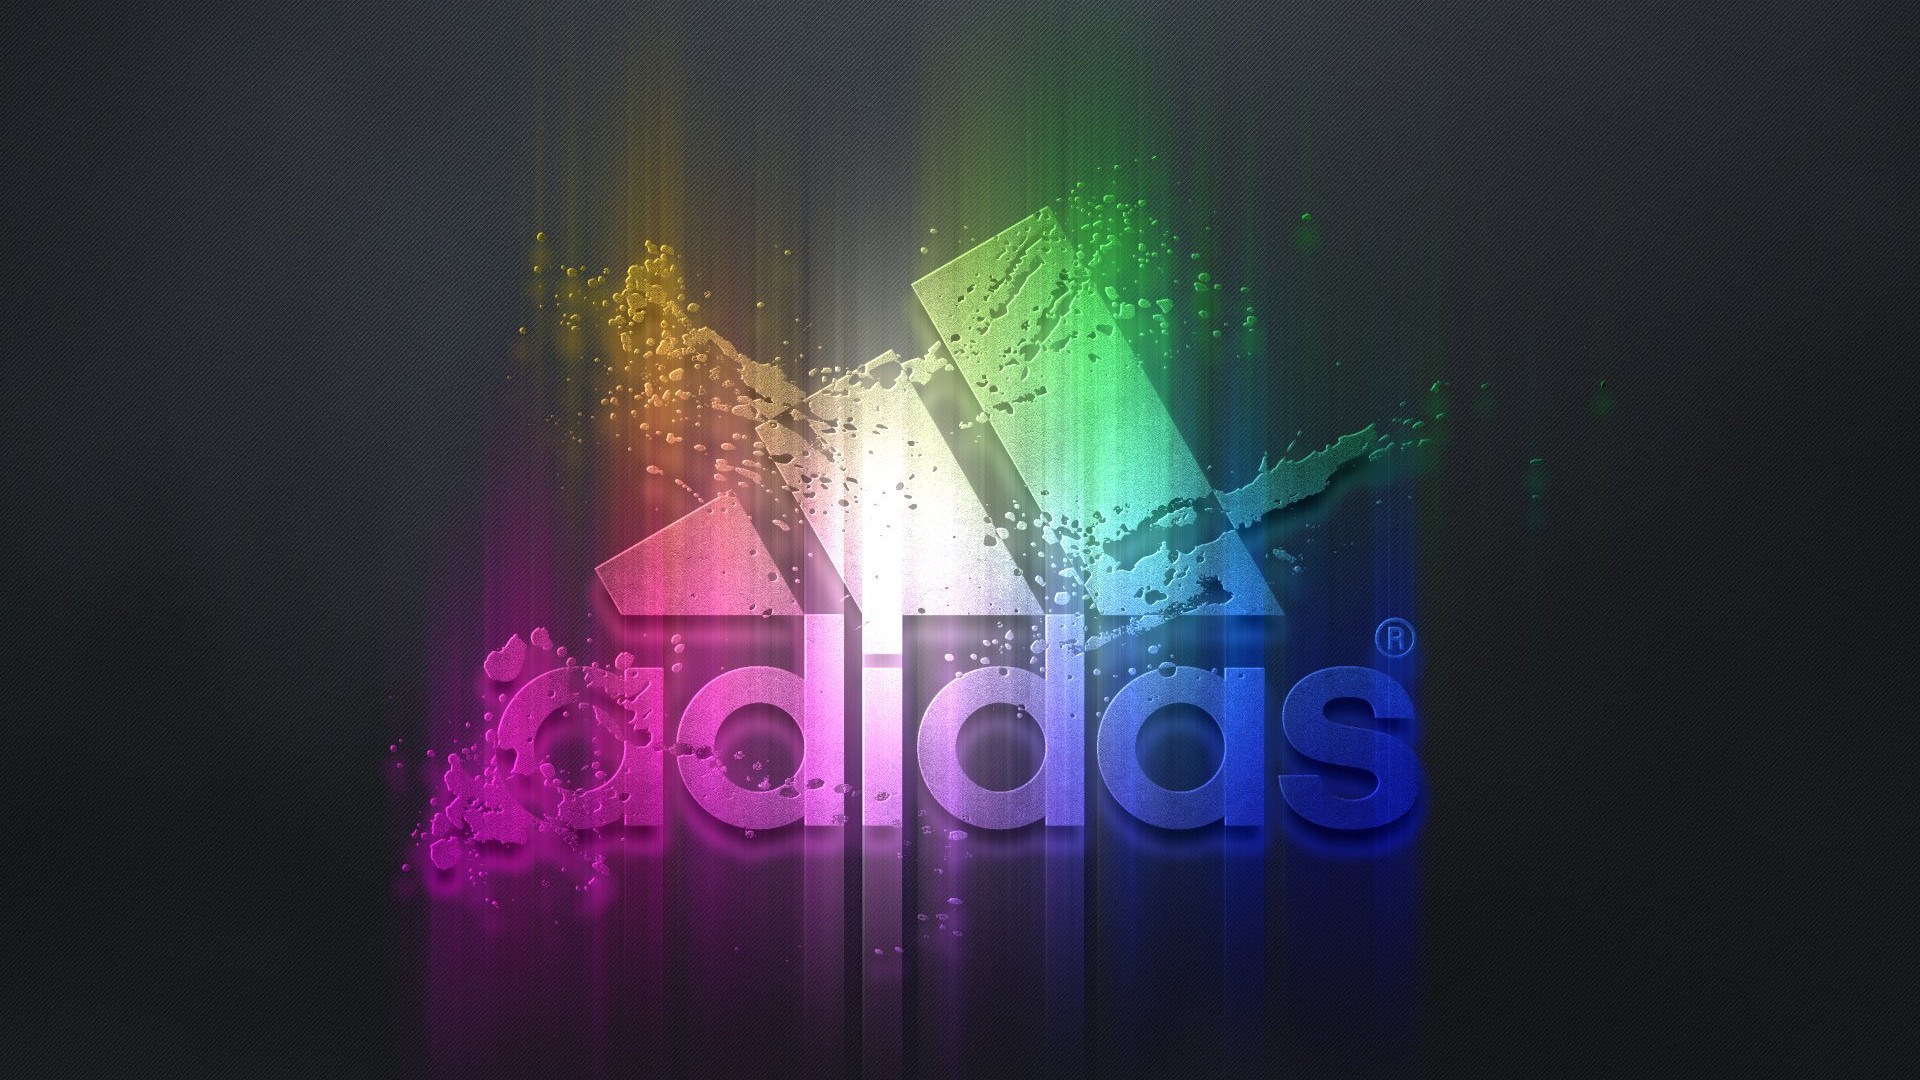 Wallpaper HD Adidas With high-resolution 1920X1080 pixel. You can use this wallpaper for your Desktop Computer Backgrounds, Mac Wallpapers, Android Lock screen or iPhone Screensavers and another smartphone device